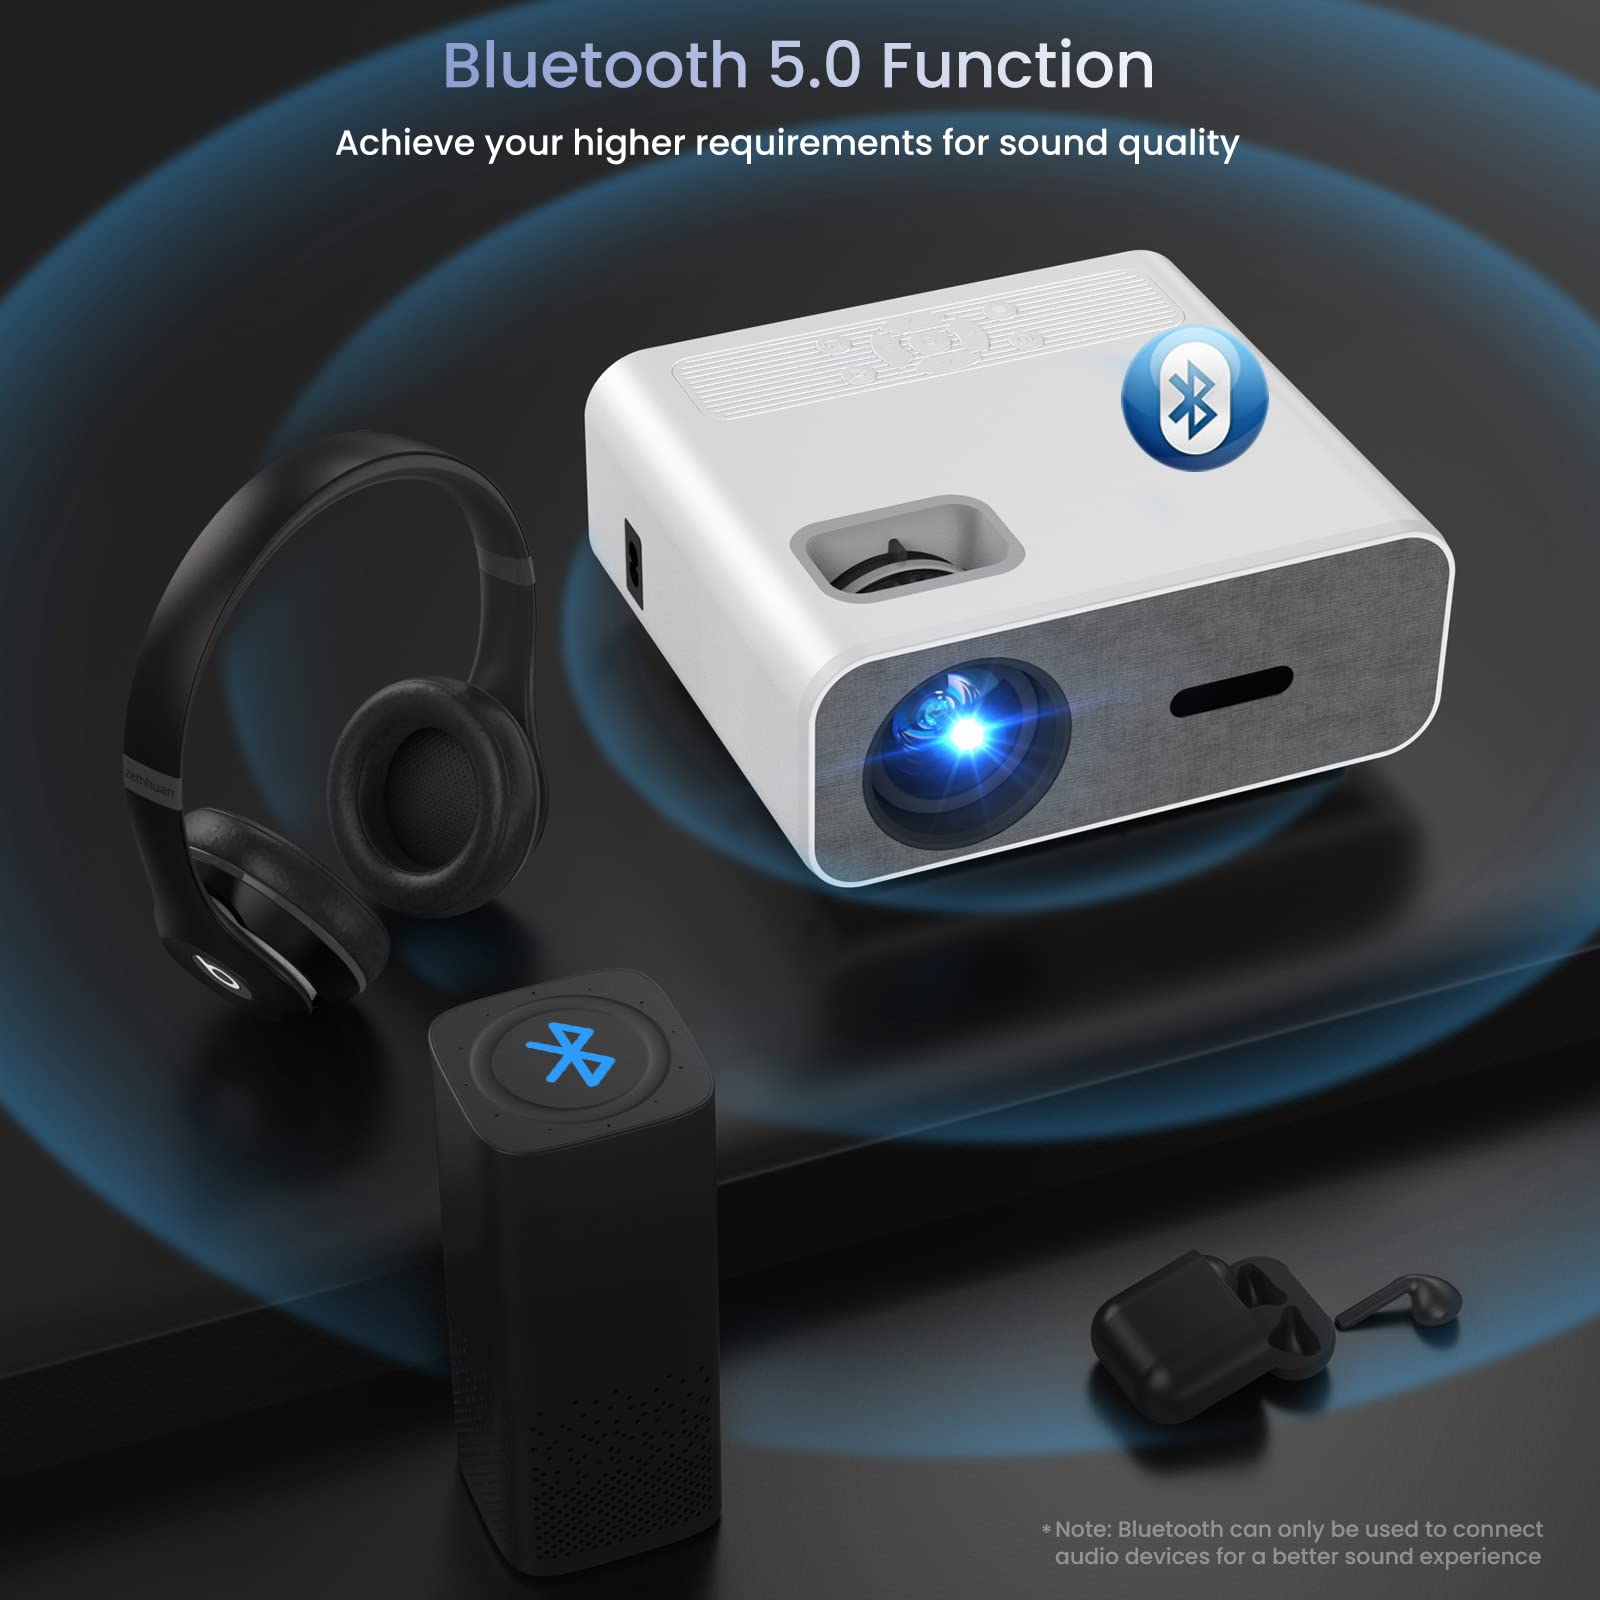 4K Support Projector with Wifi and Bluetooth, HOMPOW Mini Portable Projectors for Outdoor Home Movie, Compatible with Laptop, Smartphone, TV Stick, Xbox, PS5